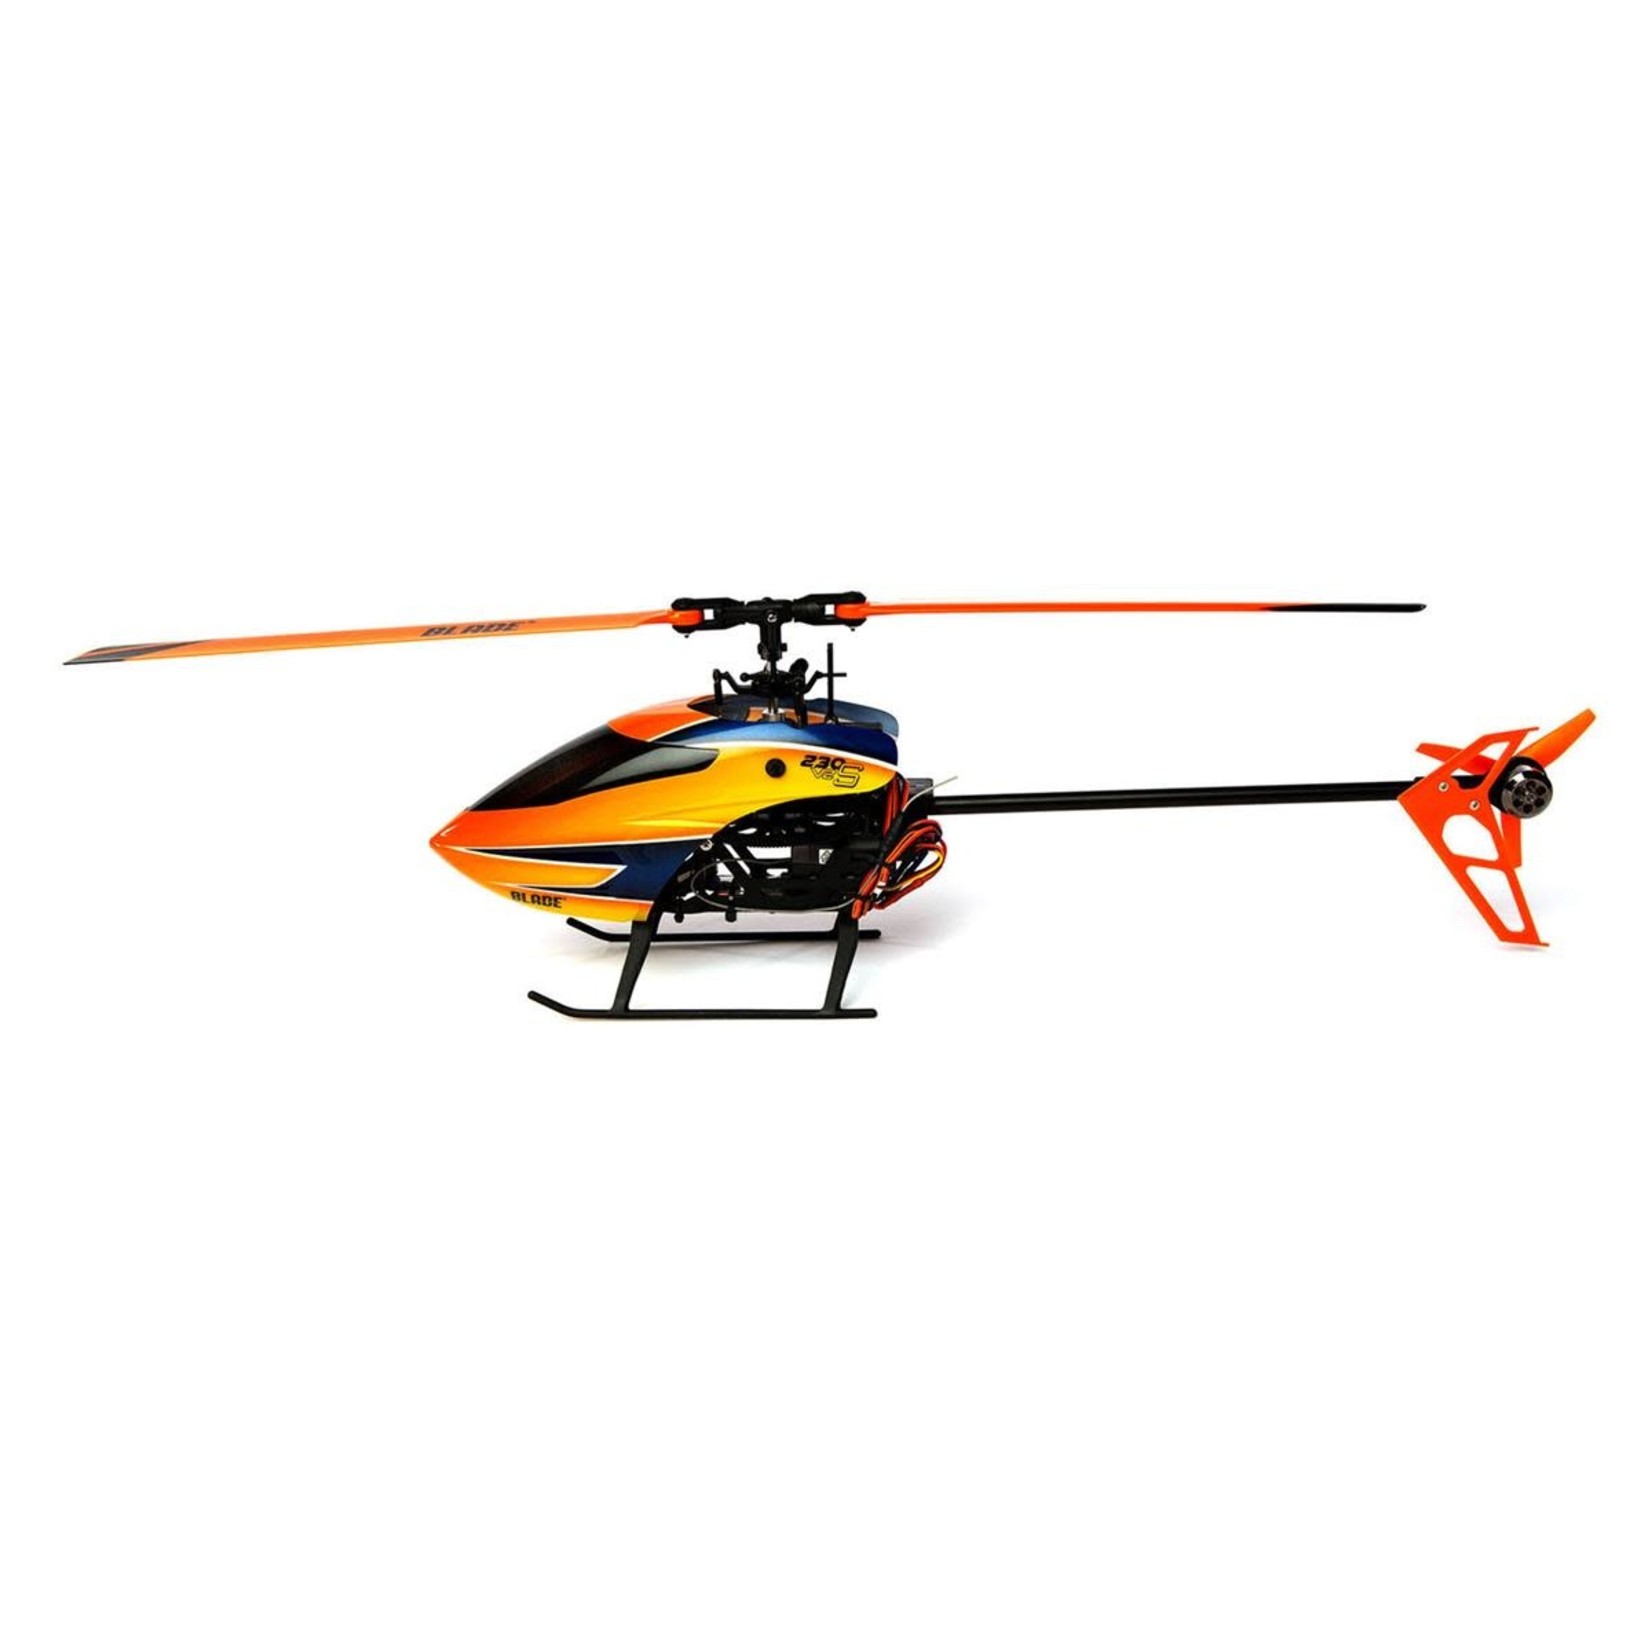 Blade Blade 230 S Smart RTF Flybarless Electric Collective Pitch Helicopter w/DXS 2.4GHz Radio & SAFE Technology #BLH12001